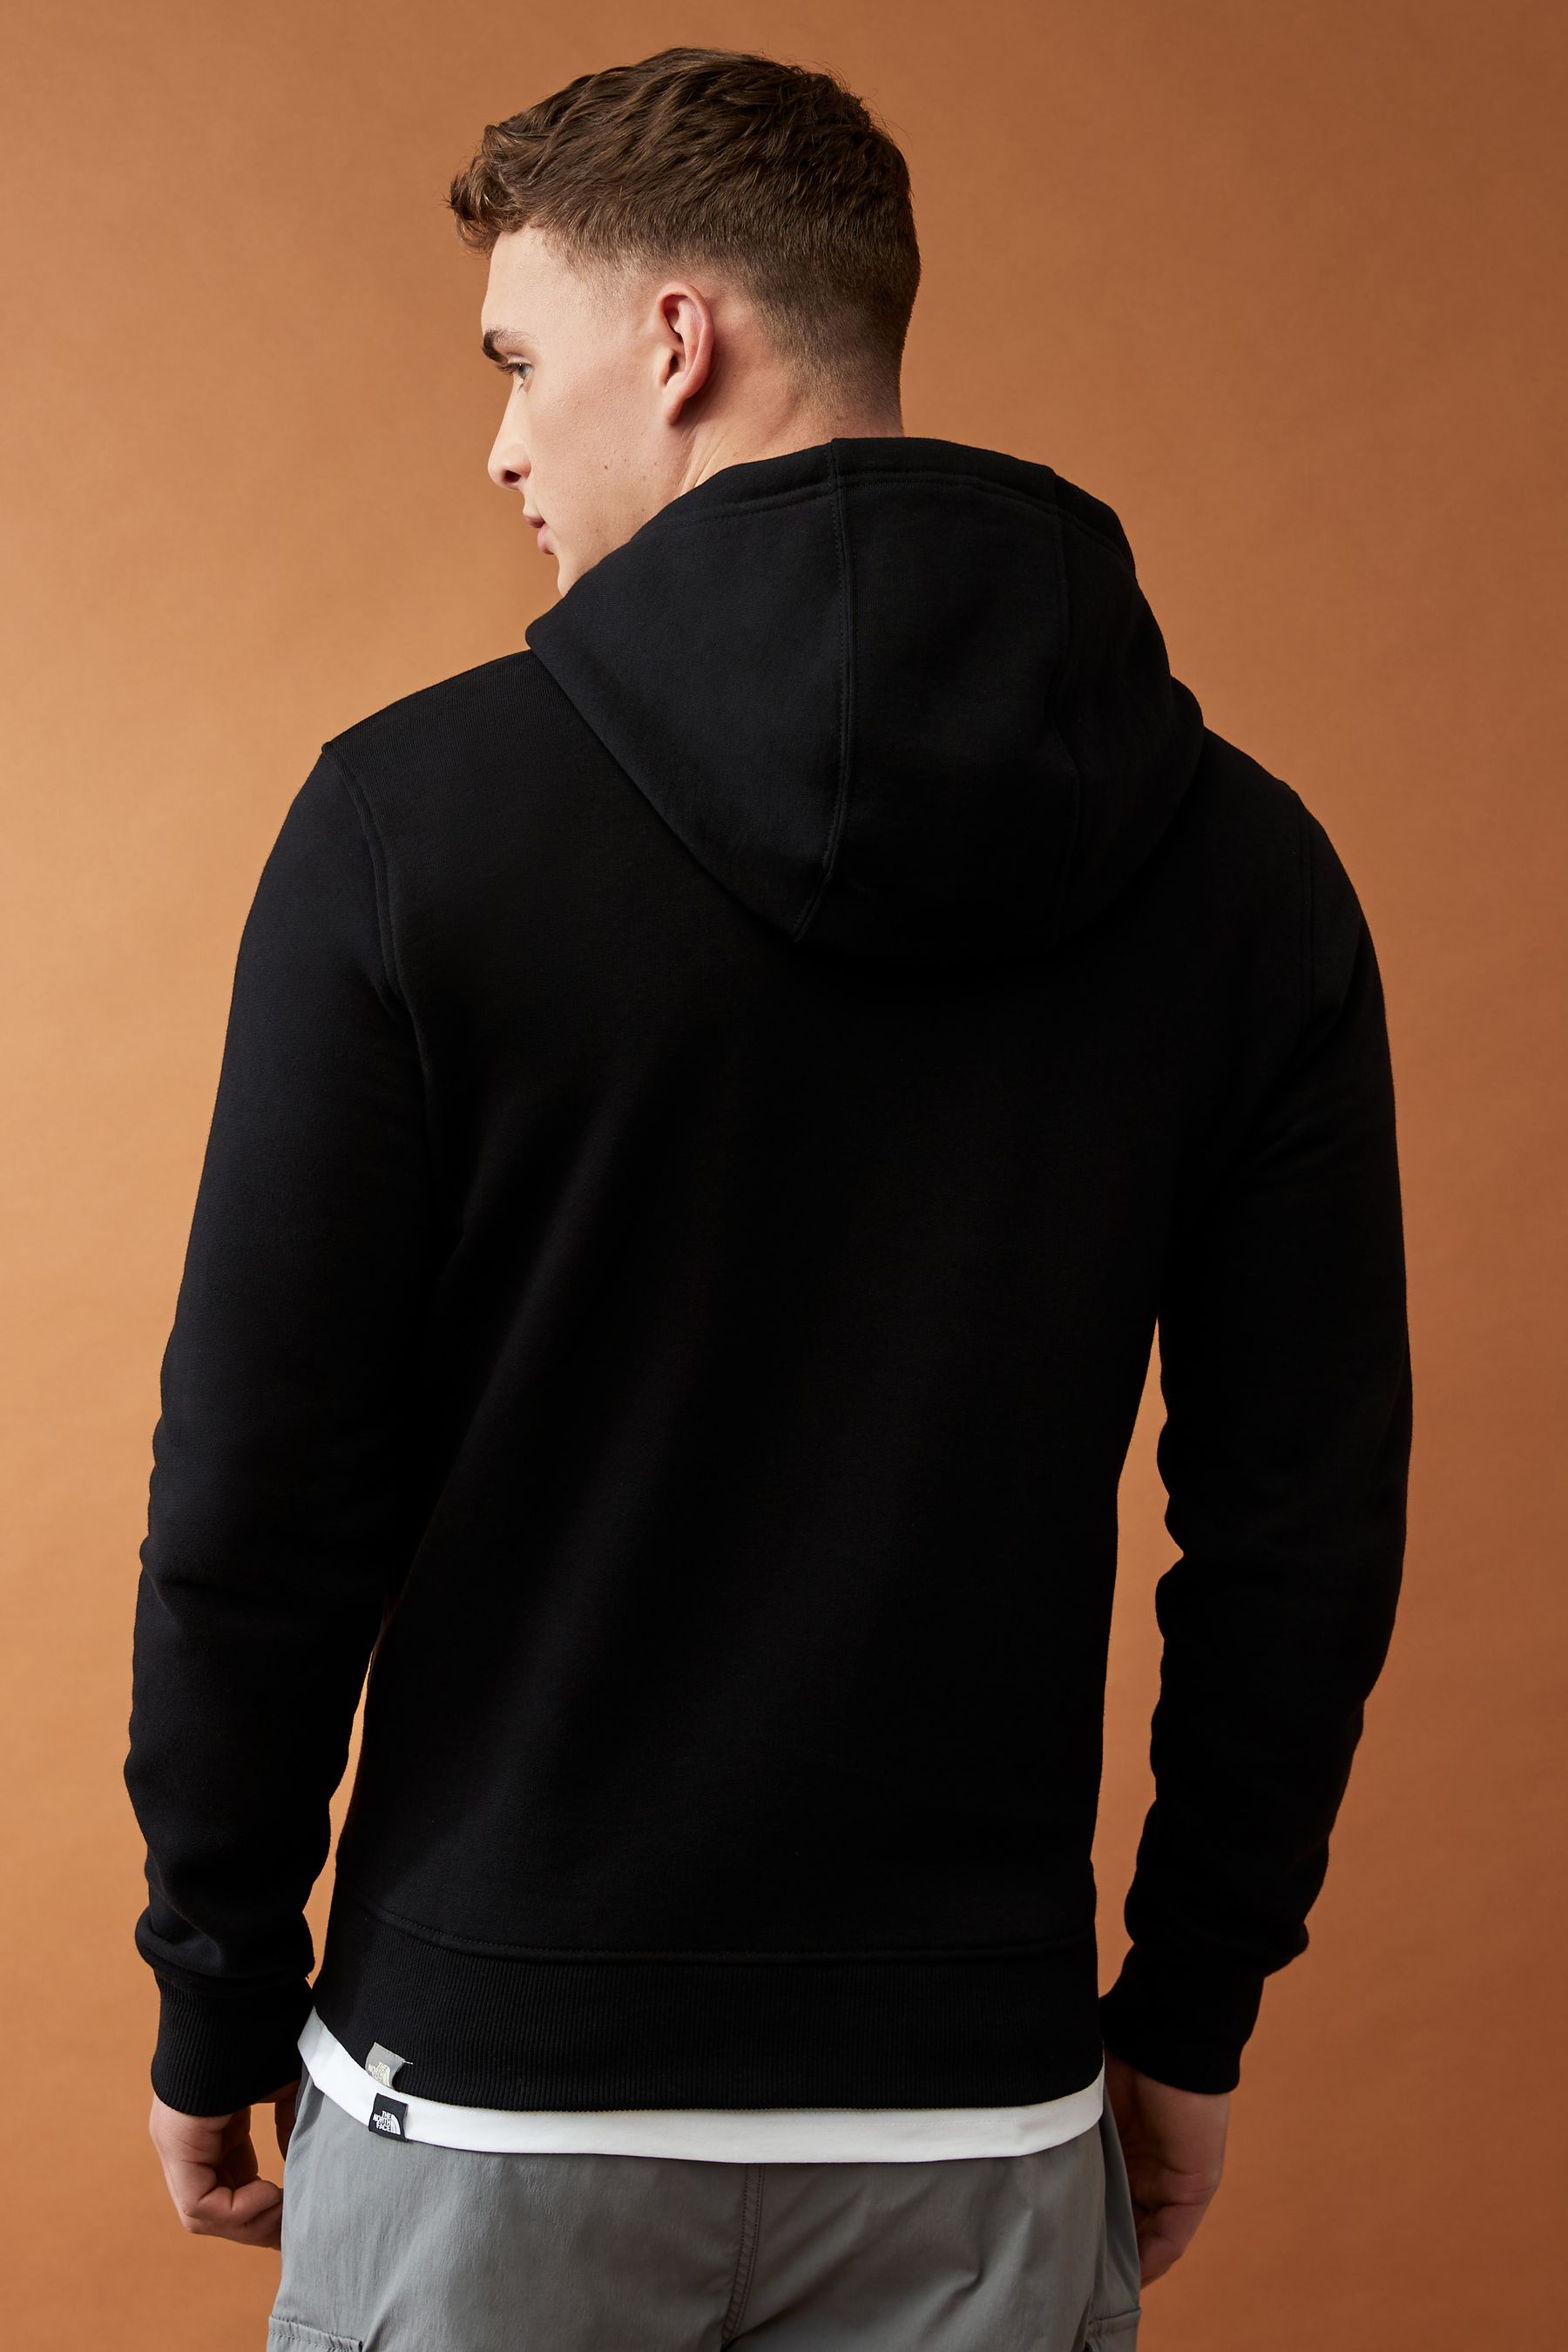 Buy The North Face Drew Peak Overhead Hoodie from the Next UK online shop